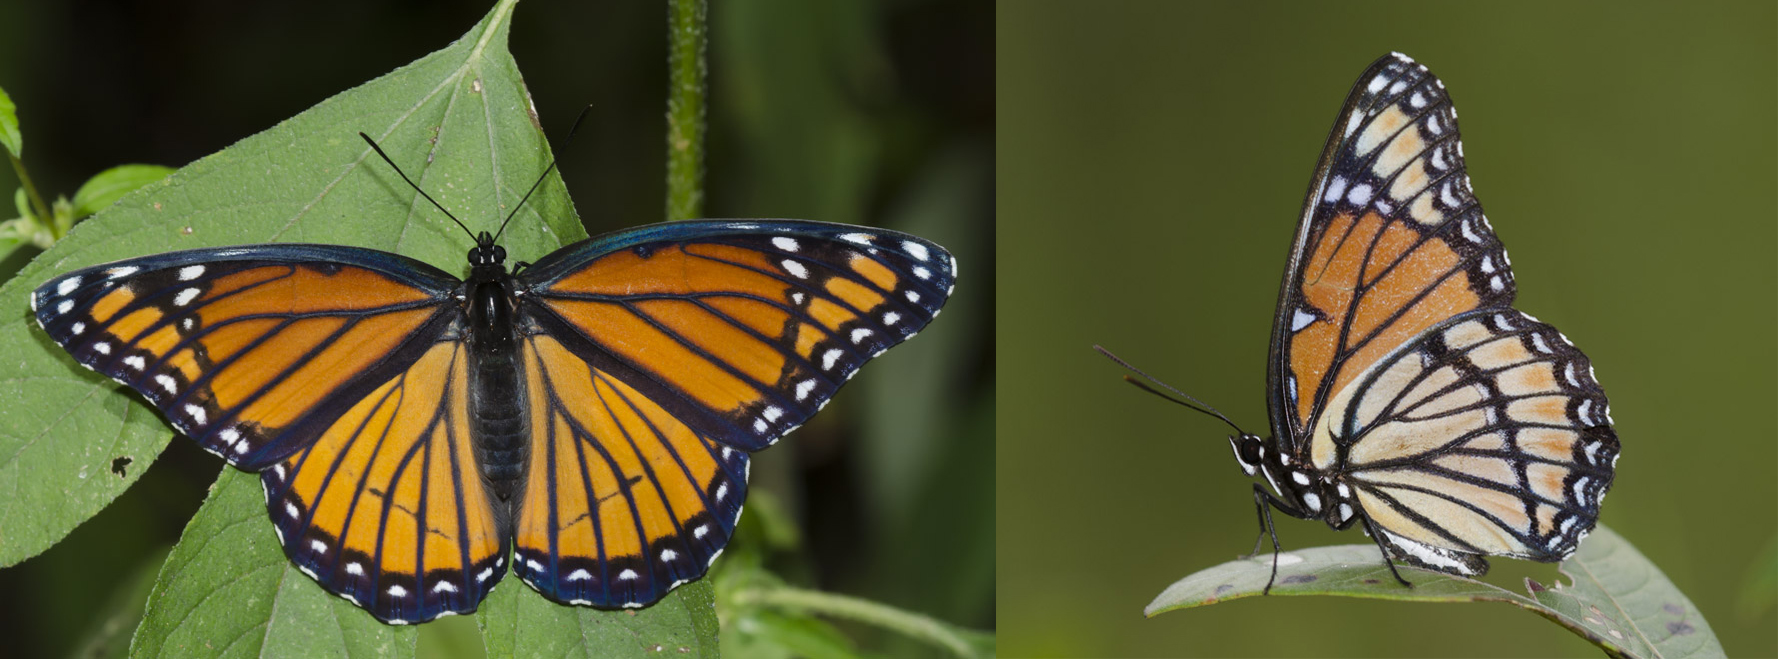 Both the dorsal and ventral view of a viceroy butterfly are shown. They closely resemble the orange and black monarch, but have one stripe across the bottom of their wings that monarchs do not.